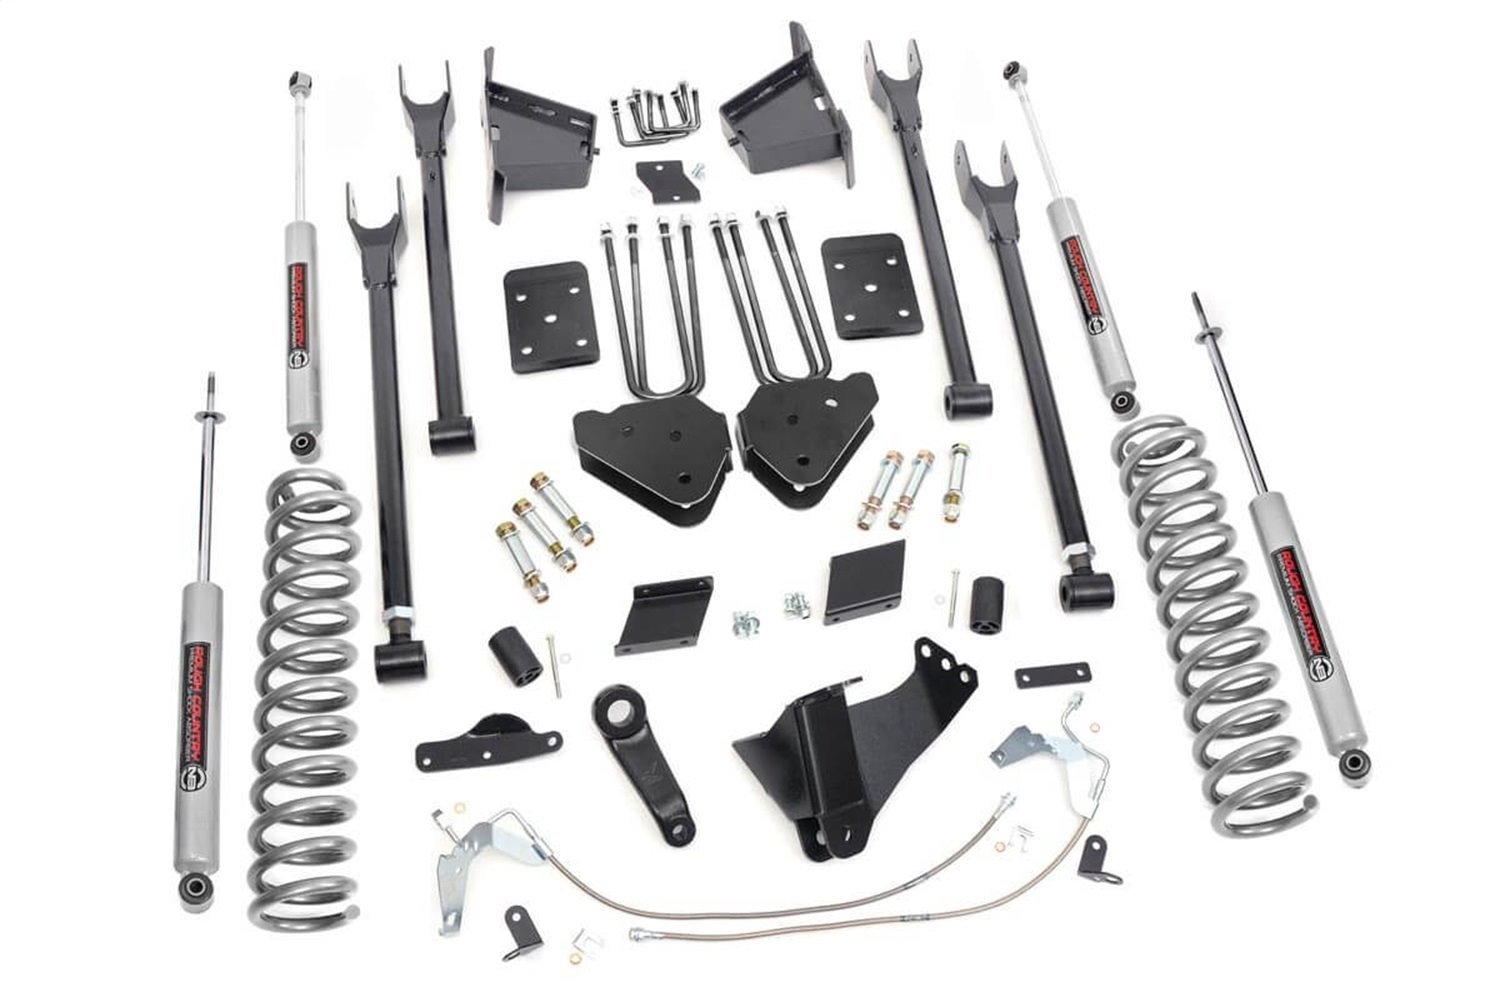 589.20 6 in. Lift Kit, 4 Link, OVLD, Ford Super Duty 4WD (2015-2016)